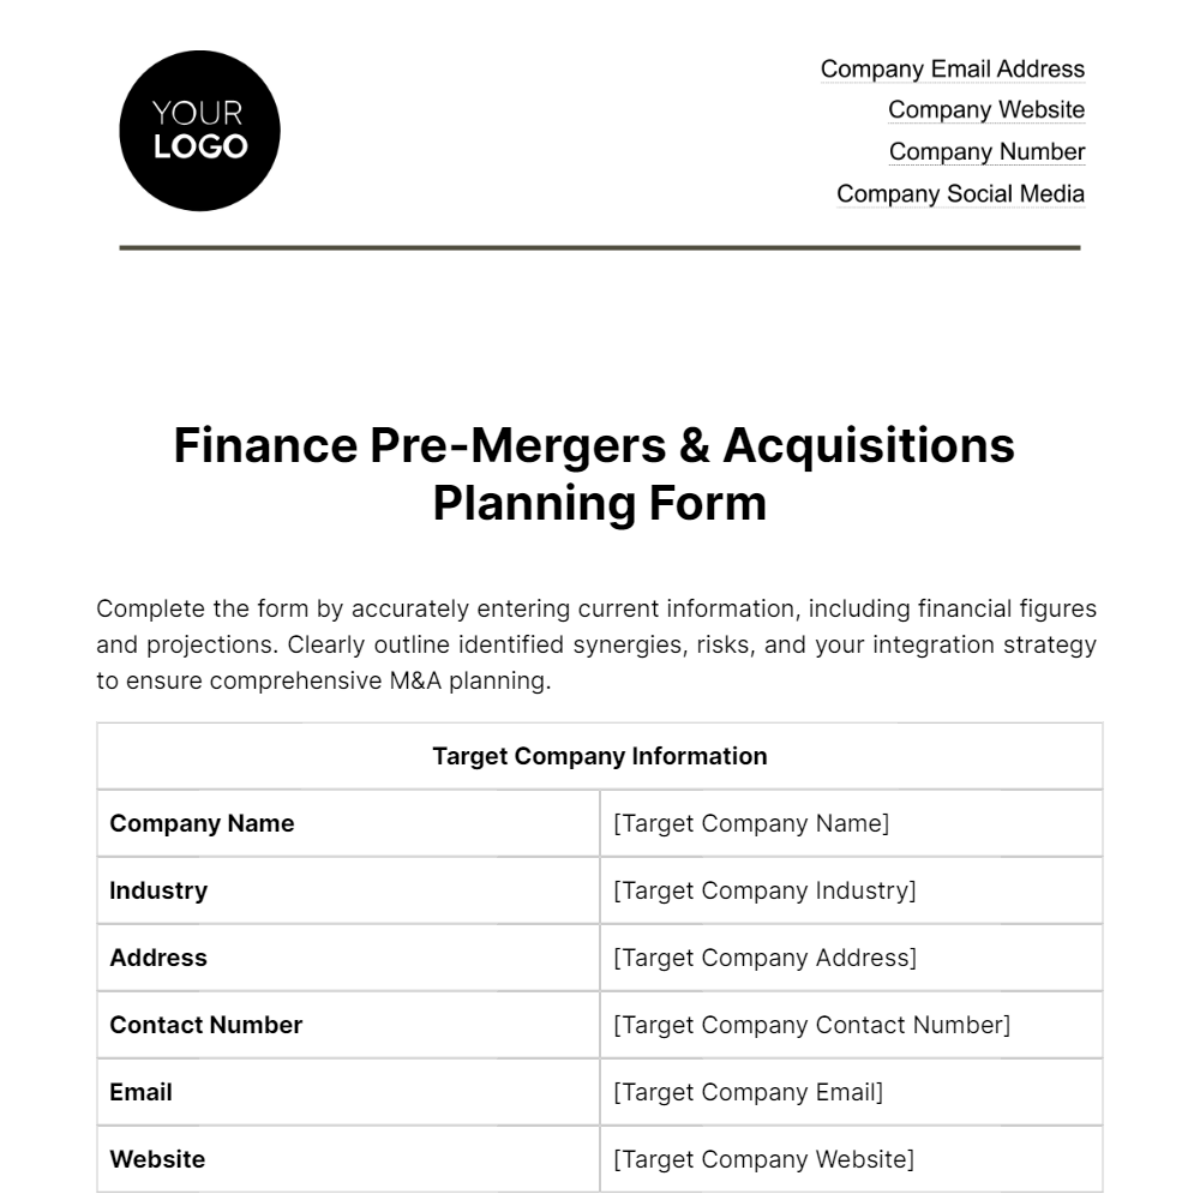 Free Finance Pre-Mergers & Acquisitions Planning Form Template